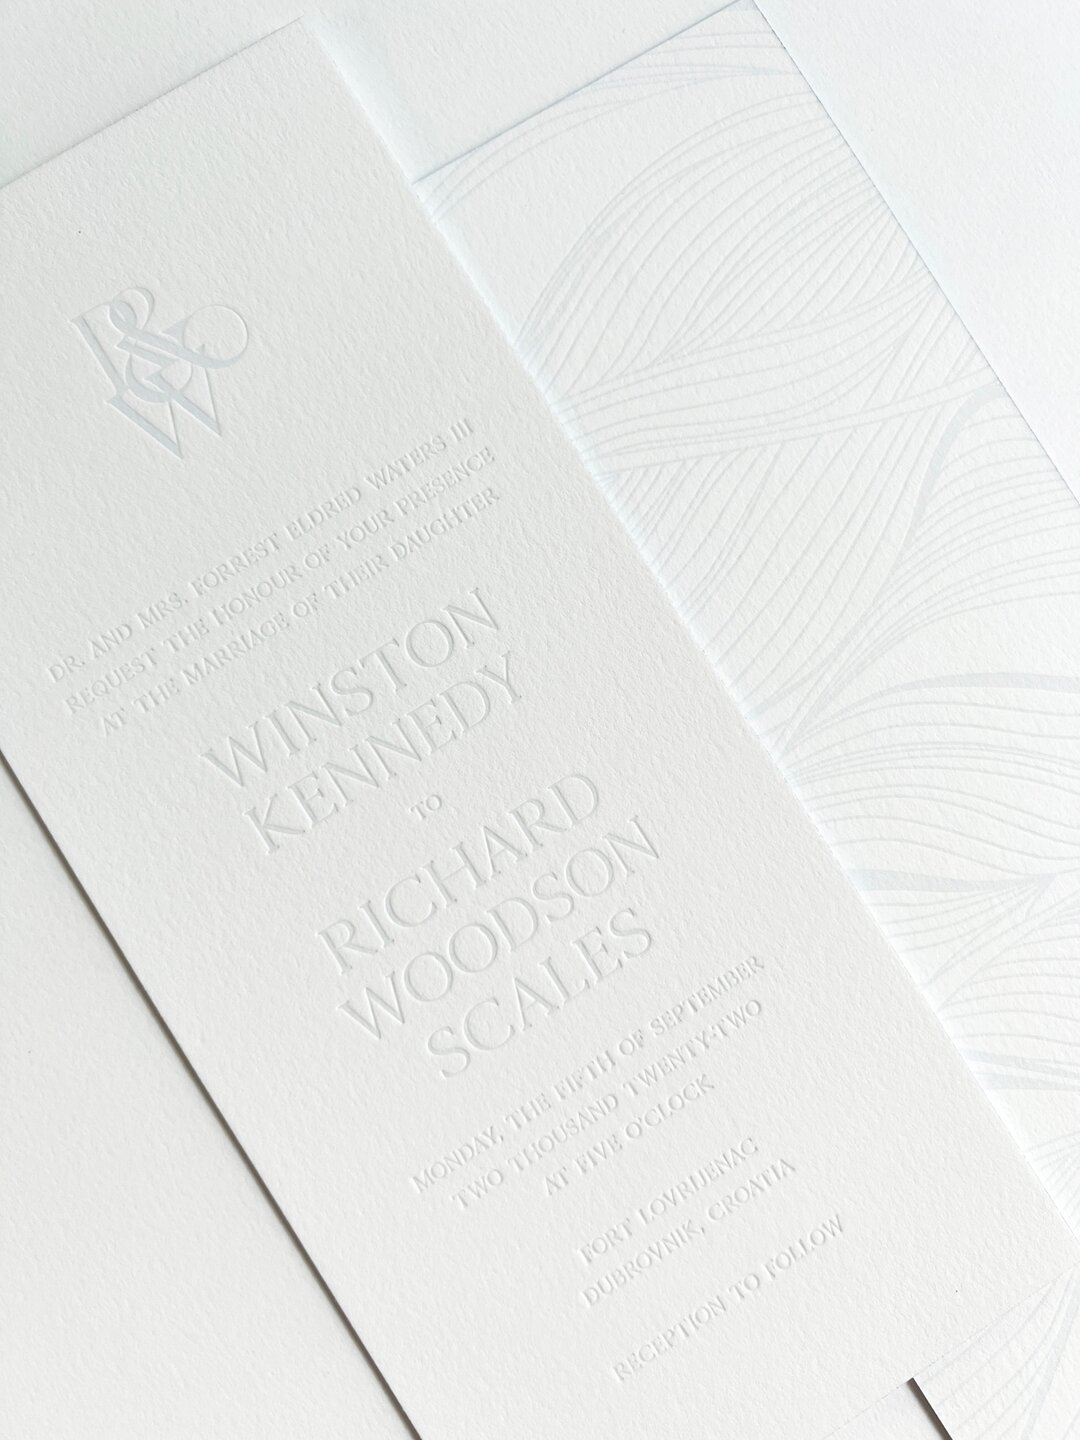 Winston &amp; Richard ✨ highlighting some of my favorites over the past few years 🤍​​​​​​​​
​​​​​​​​
This invitation is so special to me because it was for one of the brightest lights I&rsquo;ve ever had the pleasure of knowing. Winston was my desig